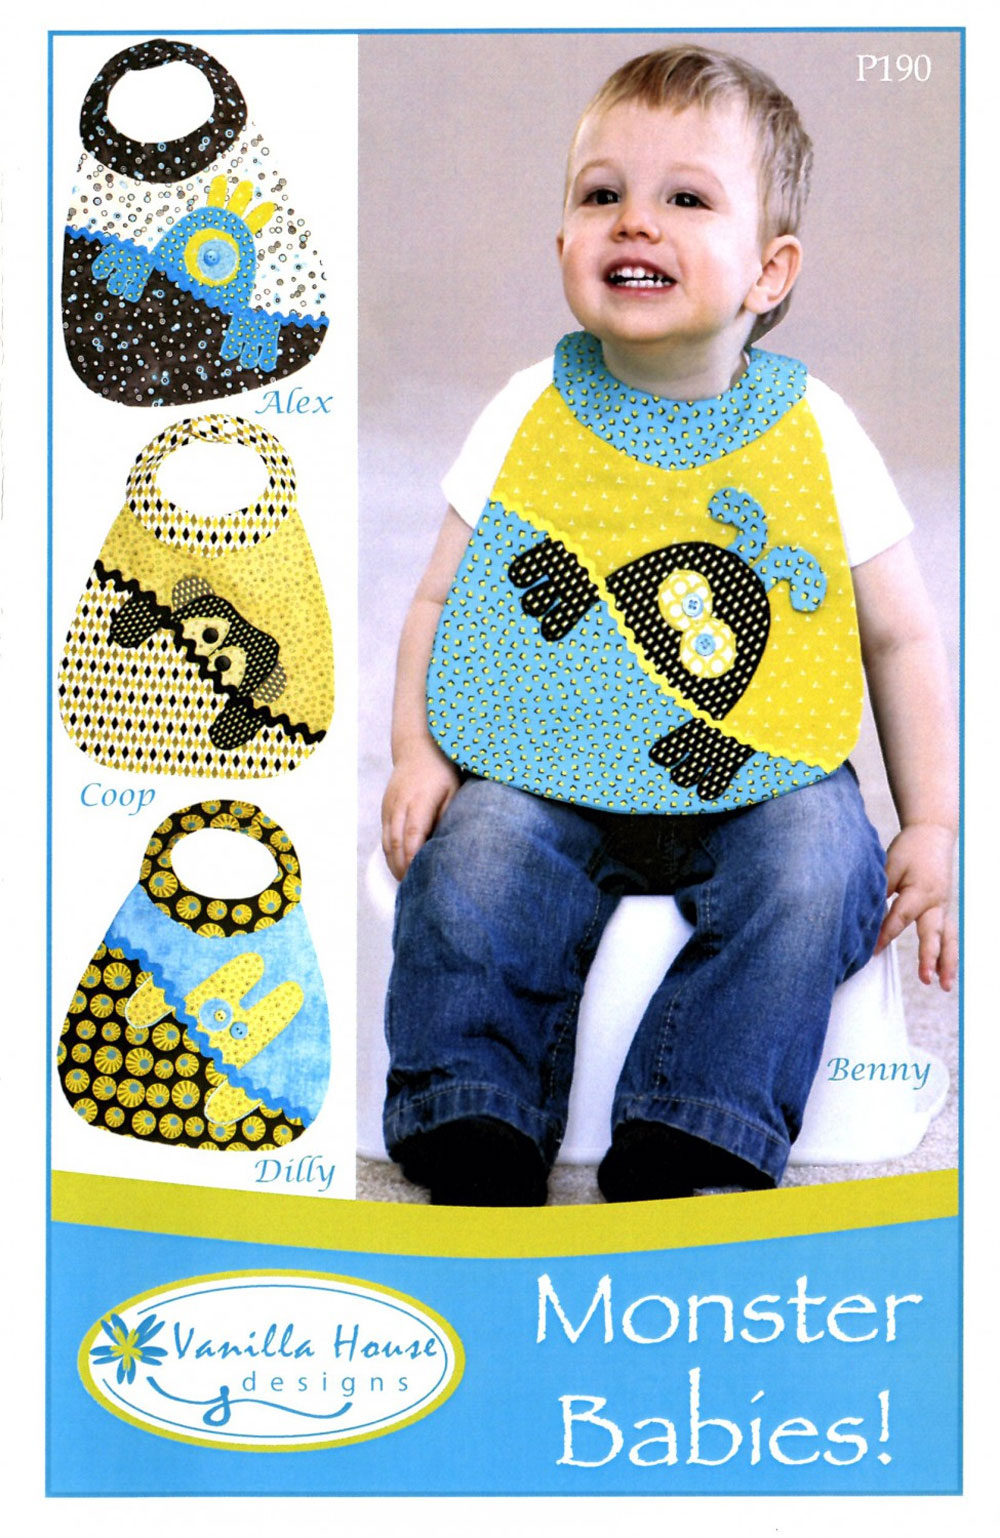 Monster-Babies-sewing-pattern-Vanilla-House-Designs-P190-front